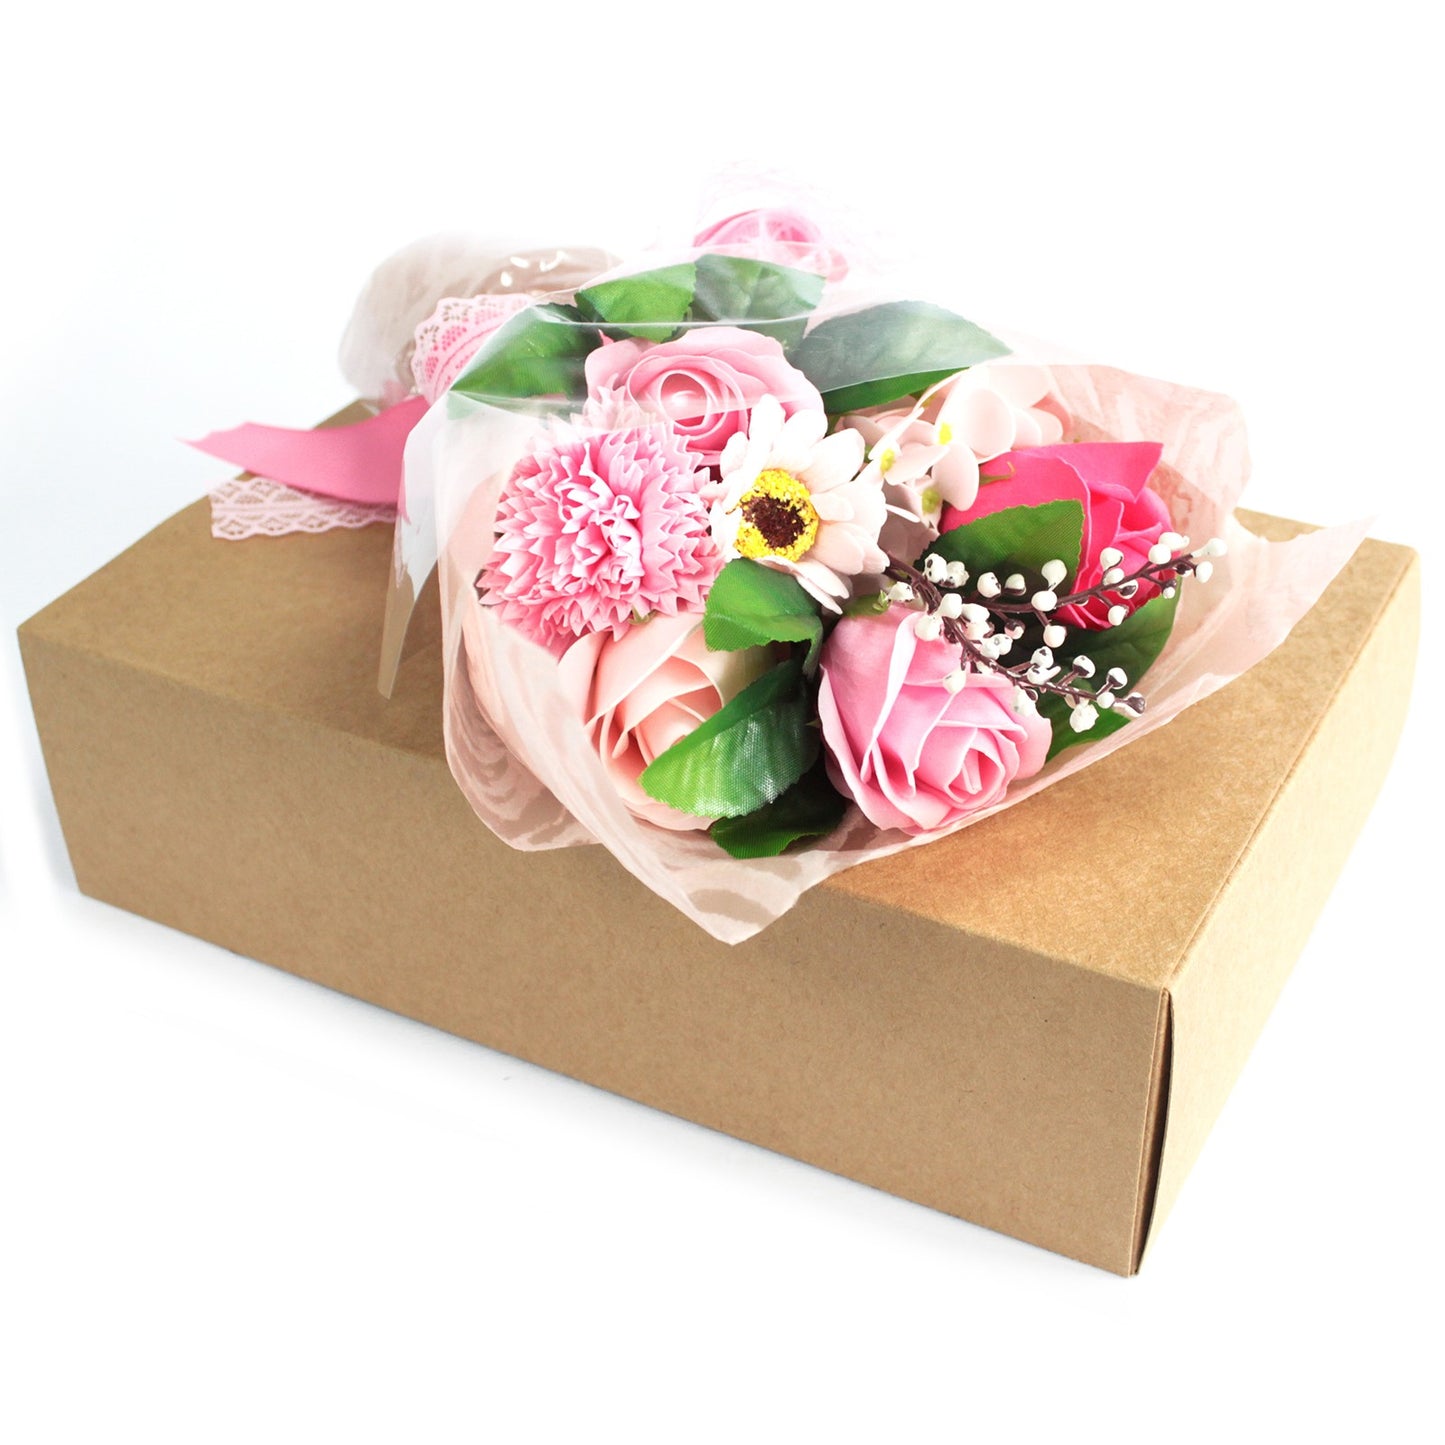 soap flowers bouquet boxed pink rose & carnation handcrafted luxury bath gift Eco-friendly SLS-free paraben-free and silicone-free these scented moisturising soap flowers bring elegance visual appeal and a refreshing aroma Ideal for personal care routines hand washing bathing